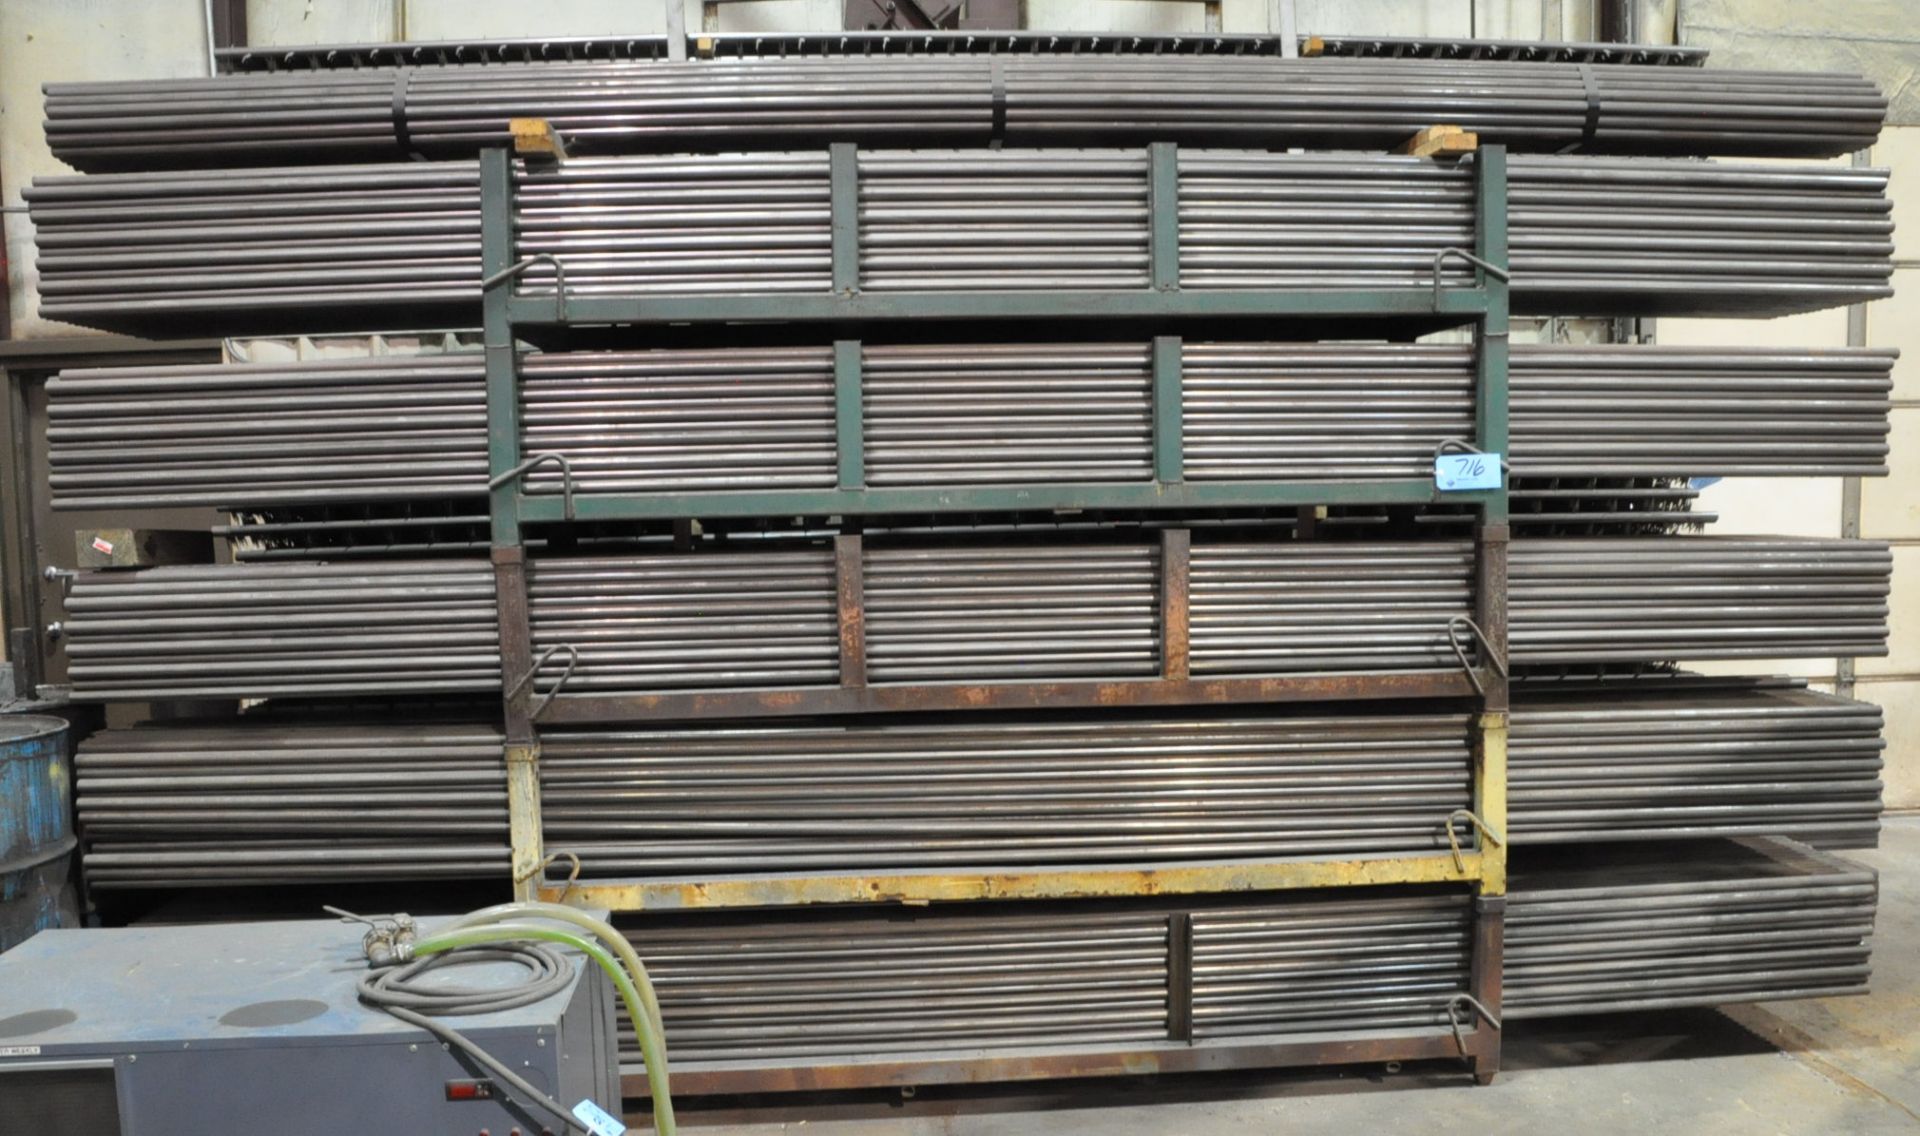 Lot -1163 pcs. 1.250” O.D. x 16 ga. wall x 15’ 7/8” Steel Hollow Tube Stock with (5) Stock Carriers - Image 3 of 3